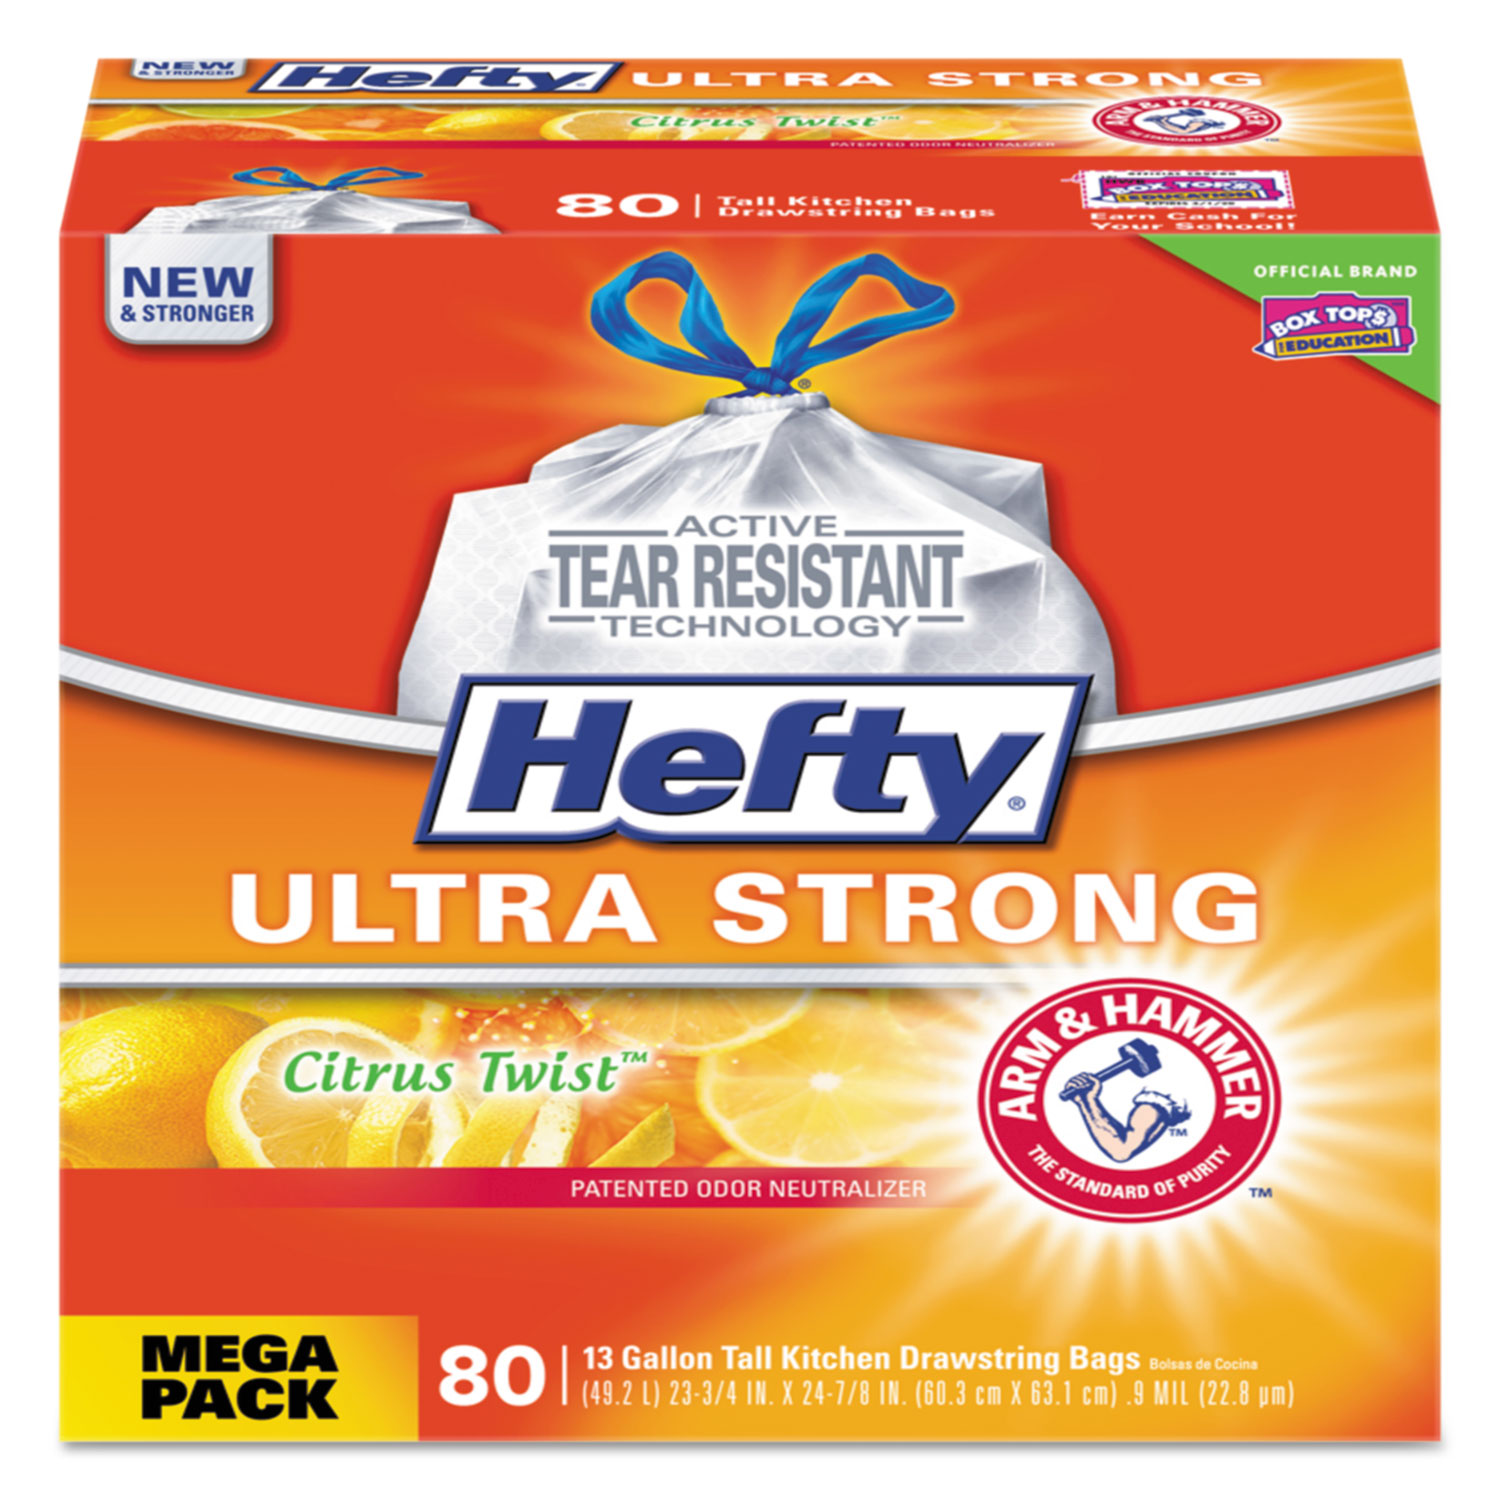  Hefty E8-4546 Ultra Strong Scented Tall White Kitchen Bags, 13 gal, 0.9 mil, 23.75 x 24.88, White, 240/Carton (PCTE84546CT) 